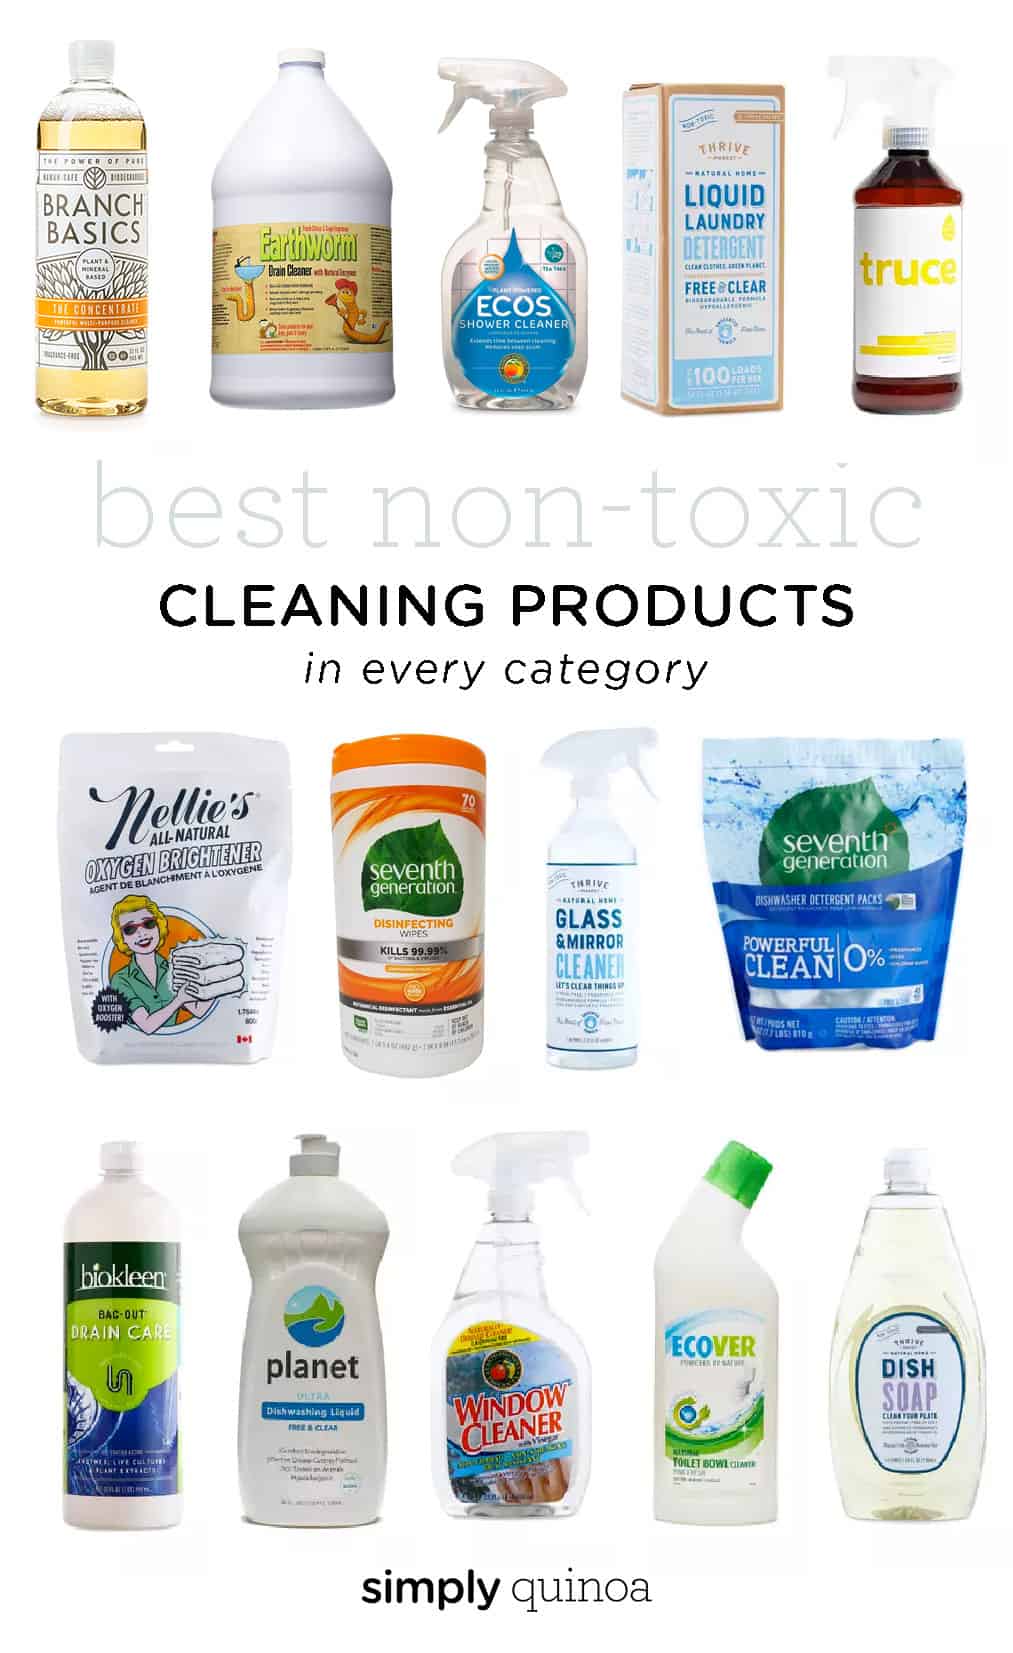 Cleaning on a budget: the cheapest cleaning products that actually work